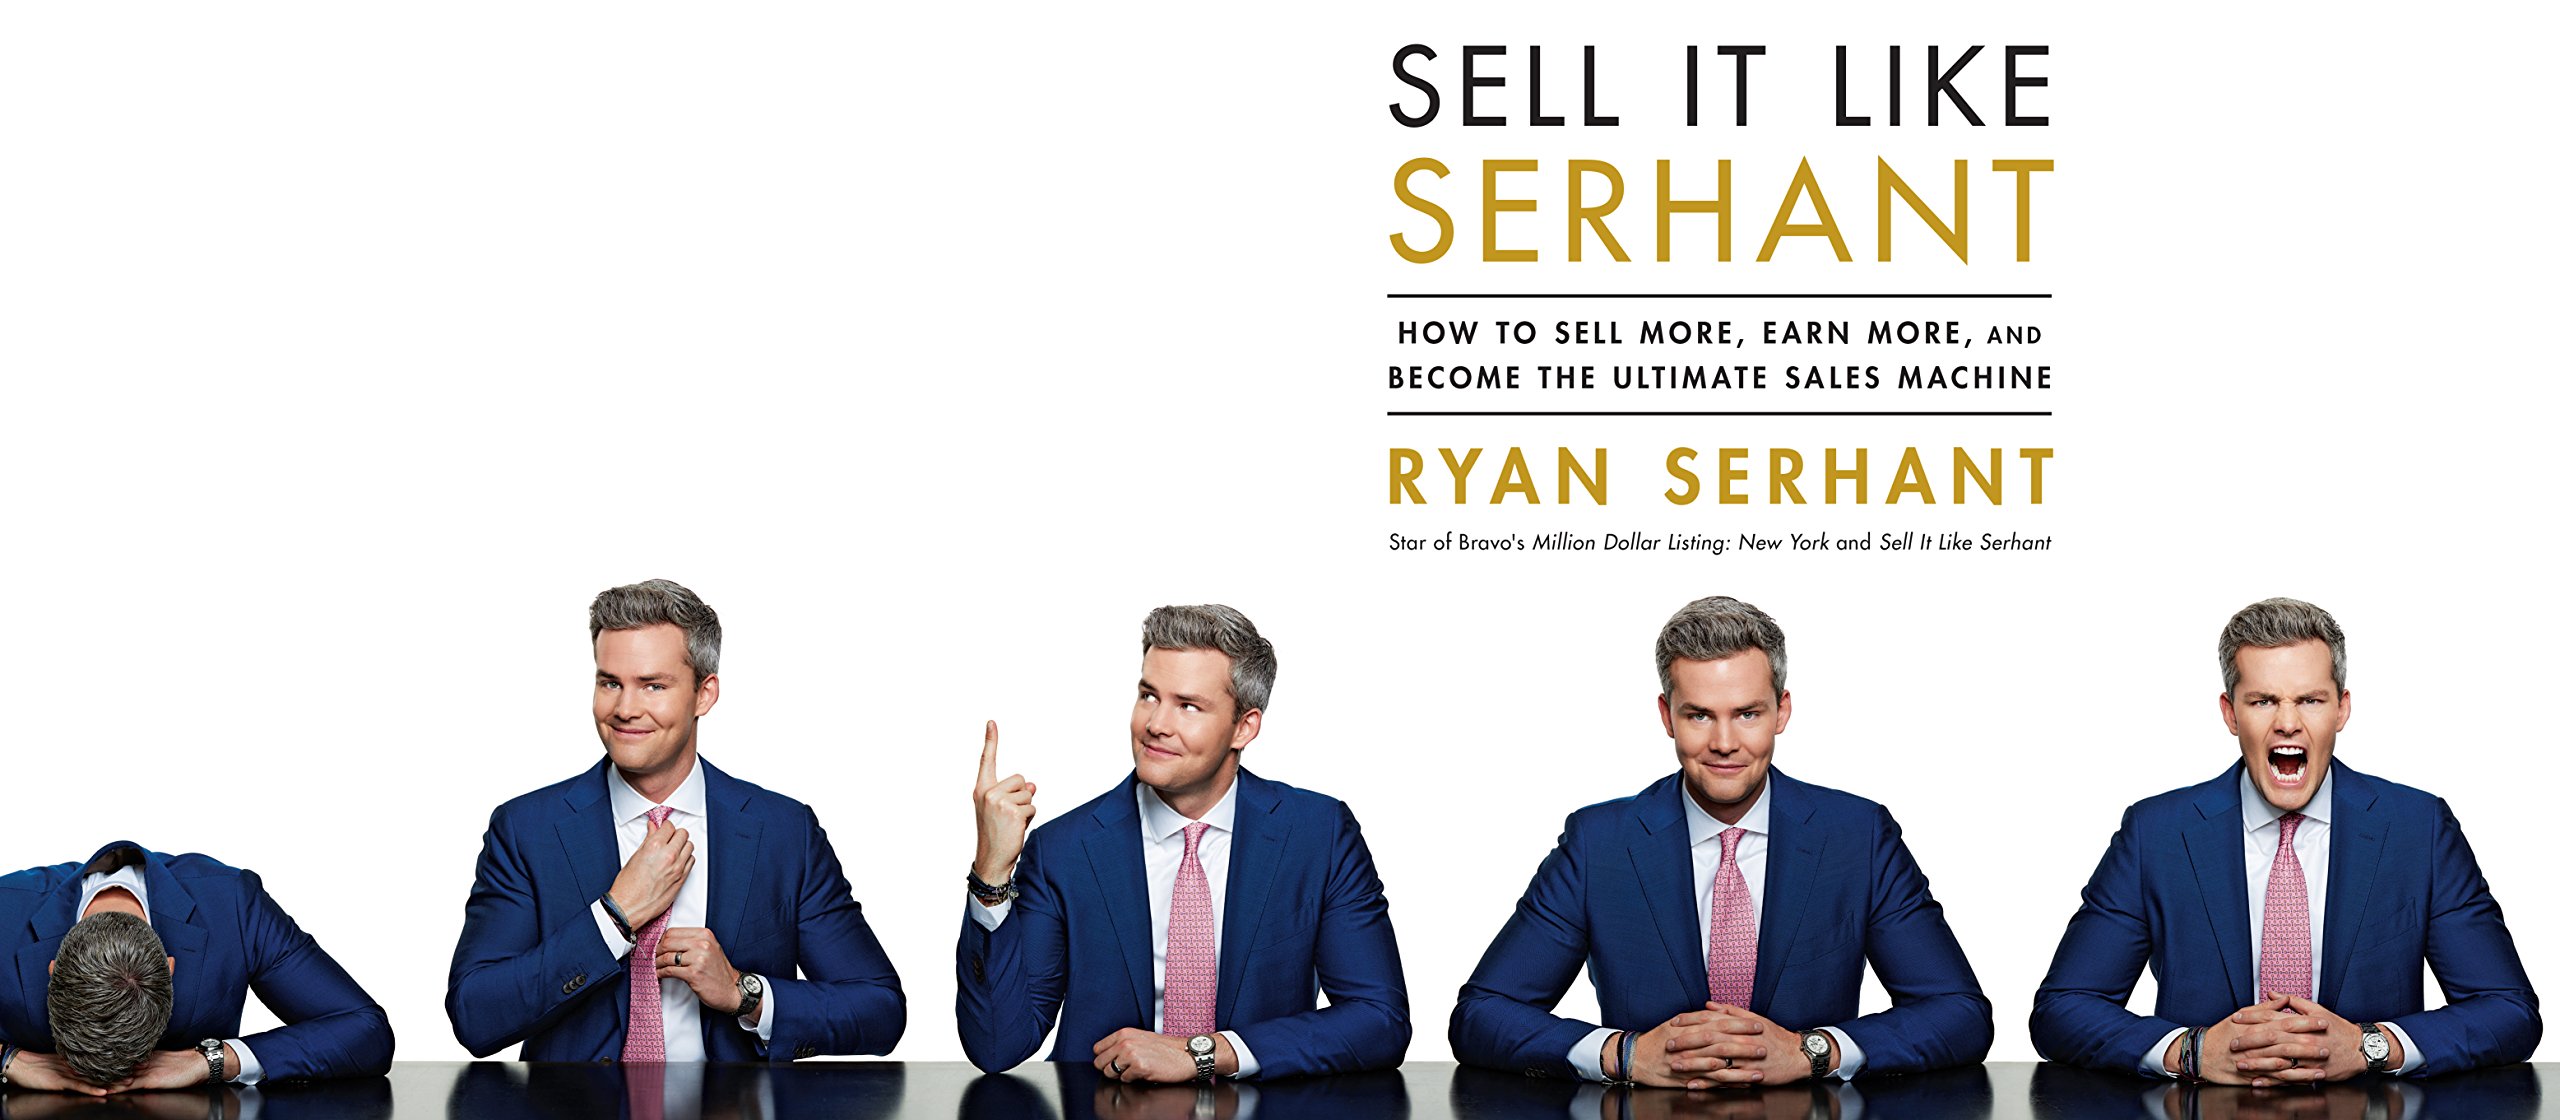 Sell It Like Serhant: How to Sell More, Earn More, and Become the Ultimate Sales Machine